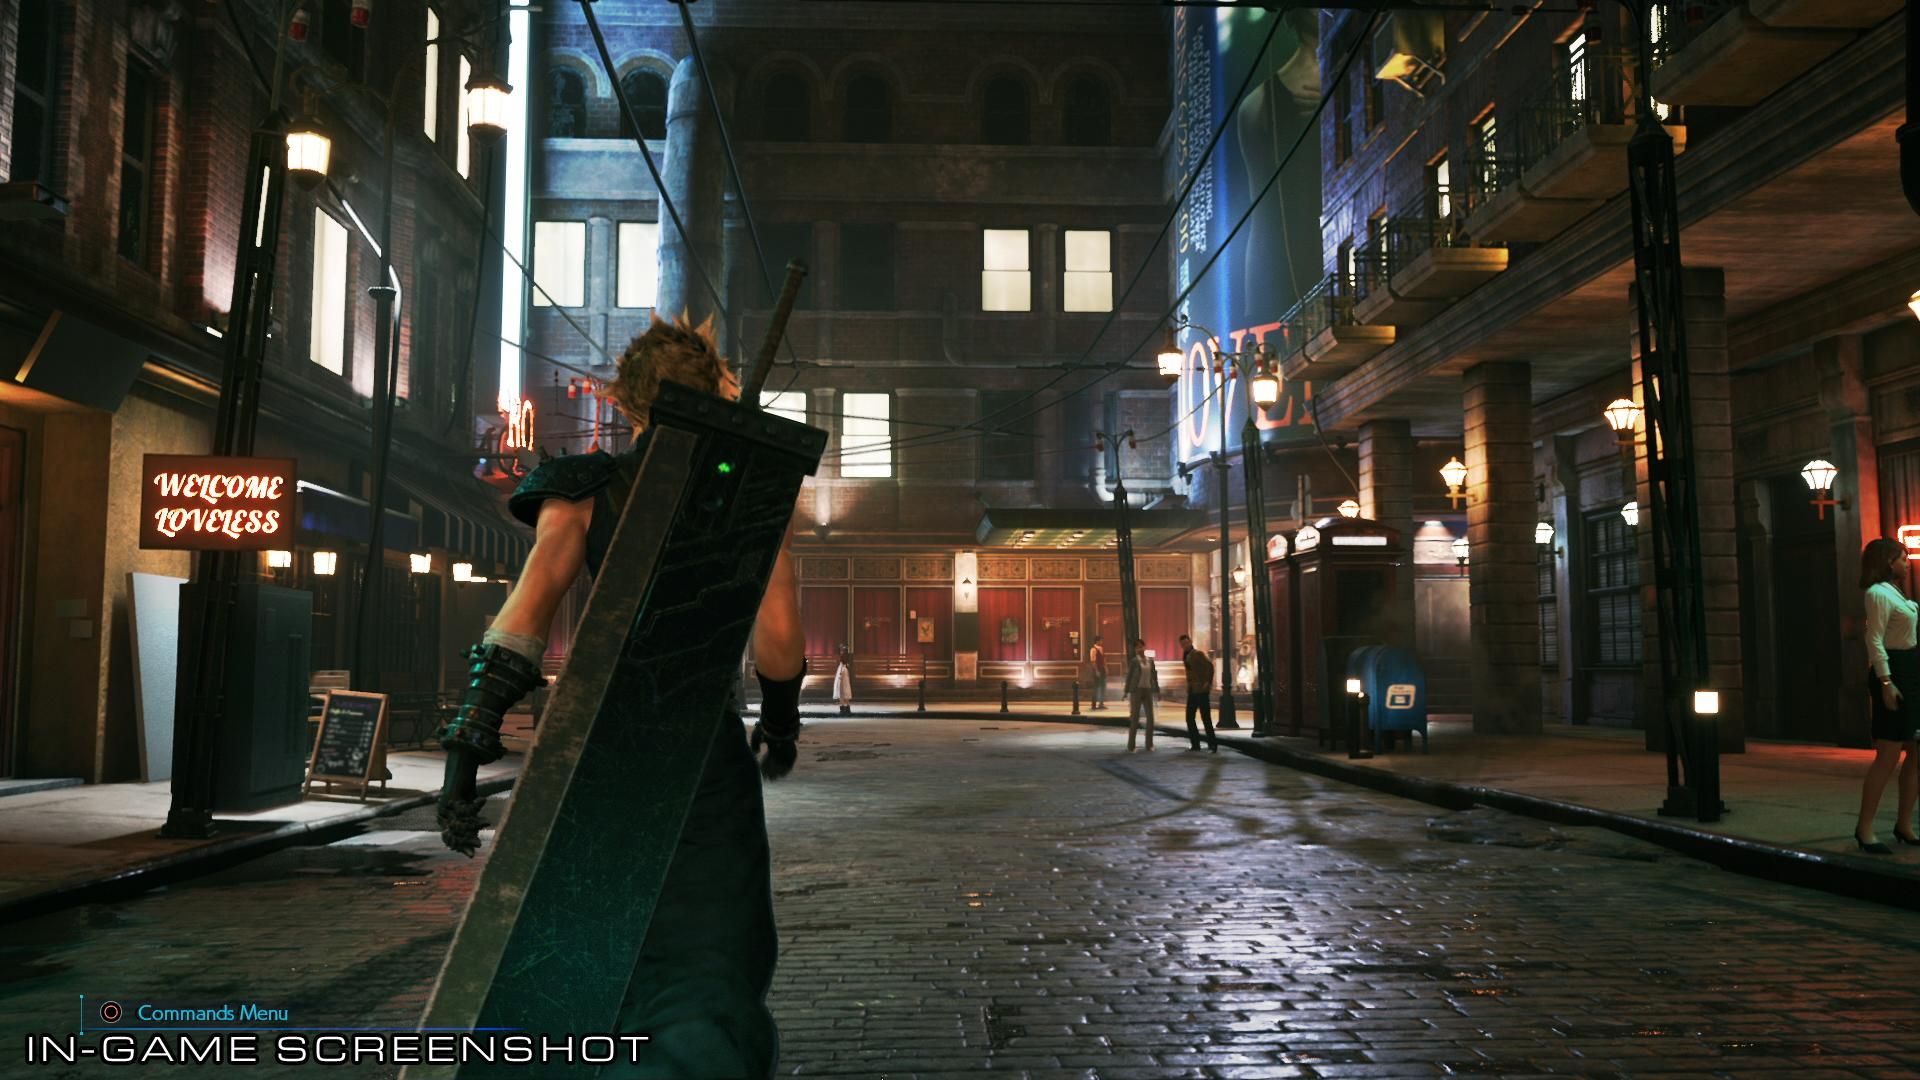 Final Fantasy VII Remake New Concept Art and Image from Midgar's